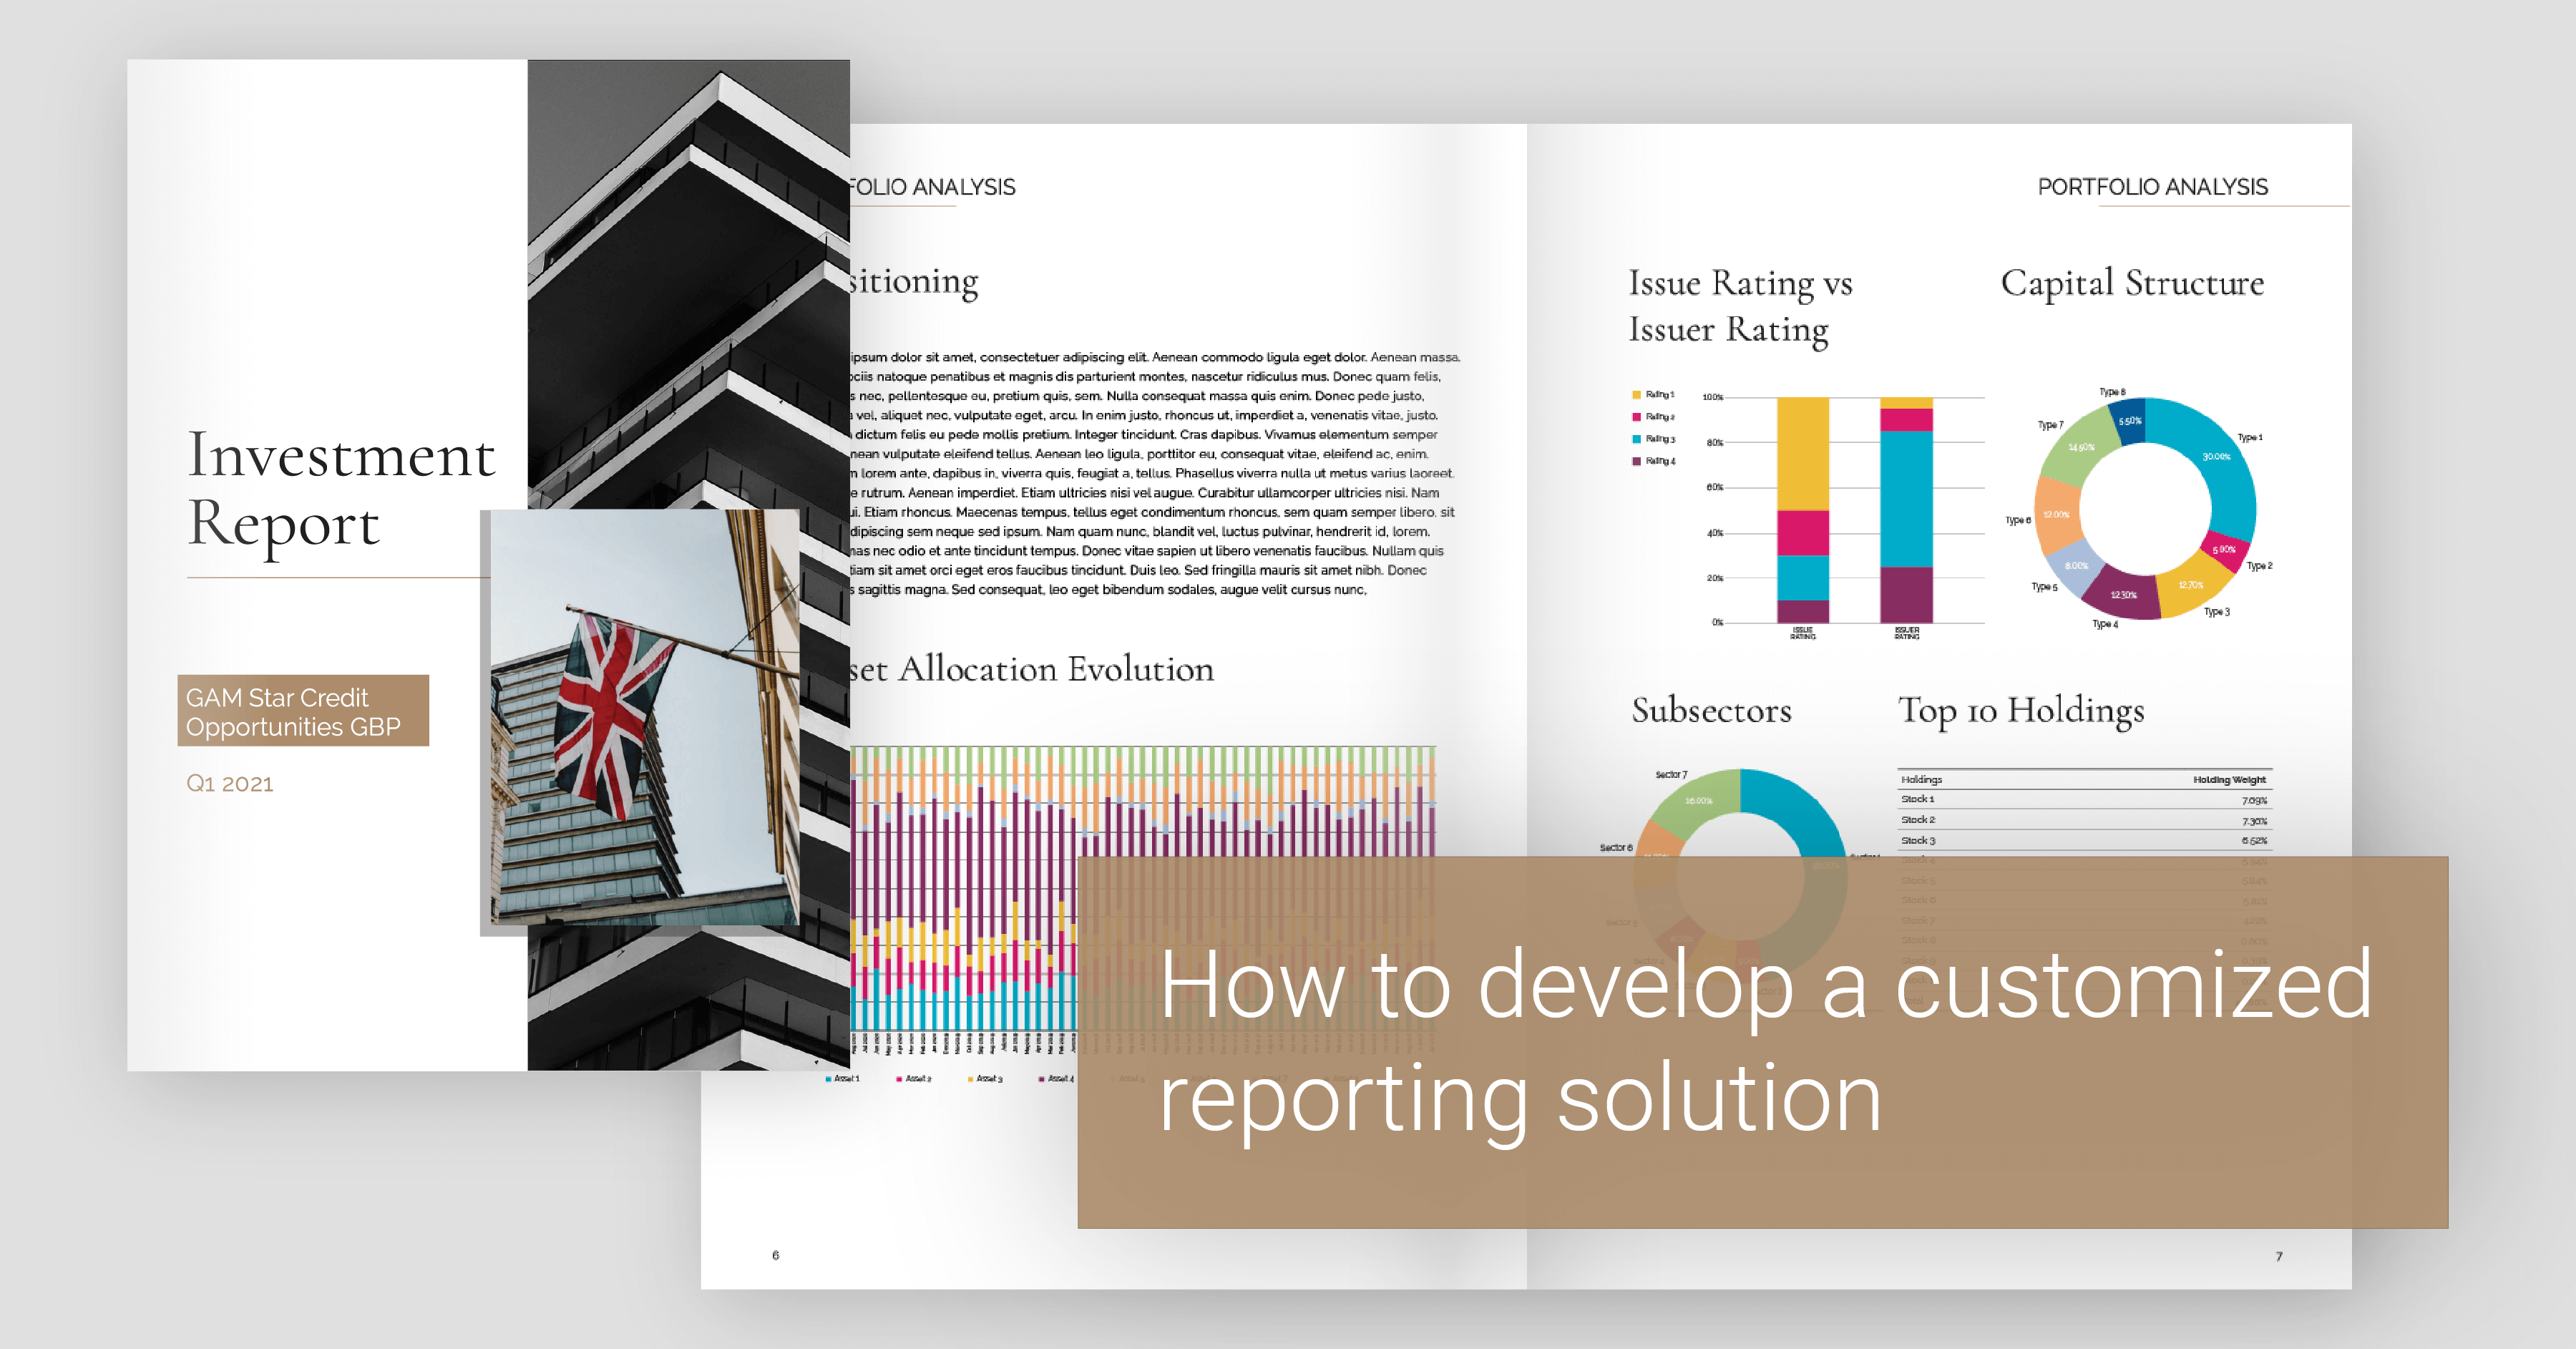 A customized reporting solution for the wealth management sector